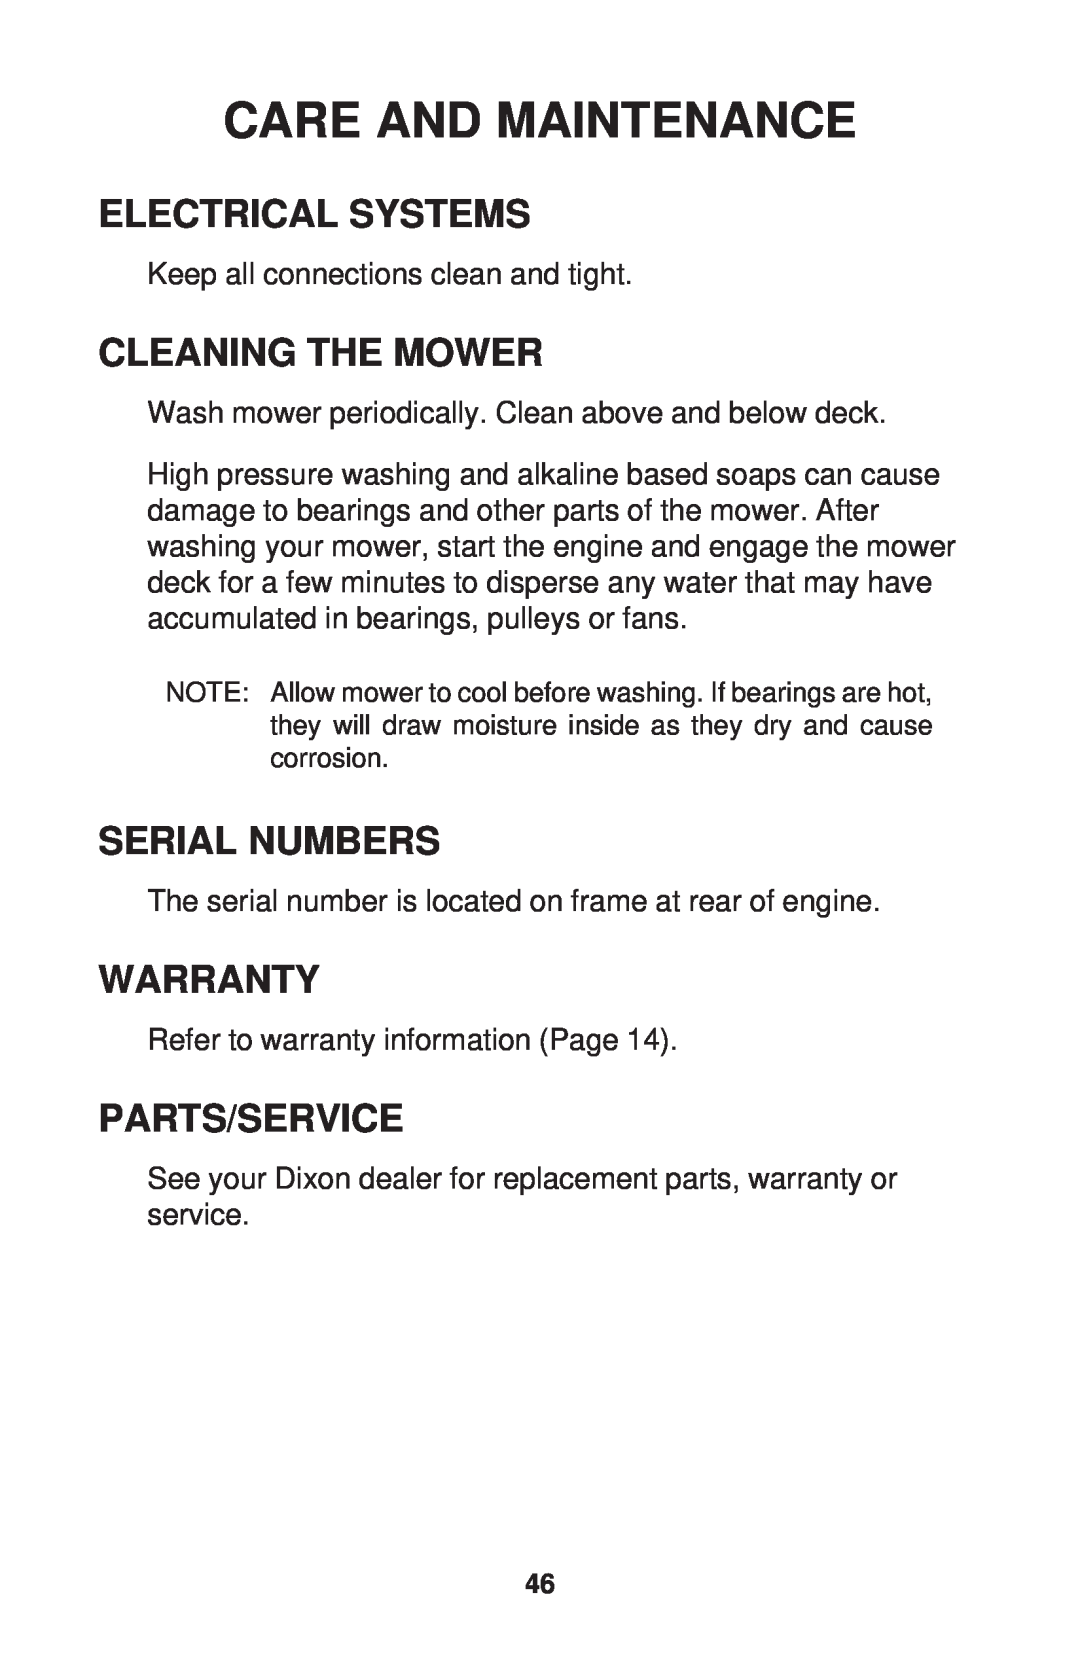 Dixon ZTR 34, ZTR 44, ZTR 34 manual Electrical Systems, Cleaning The Mower, Serial Numbers, Warranty, Parts/Service 